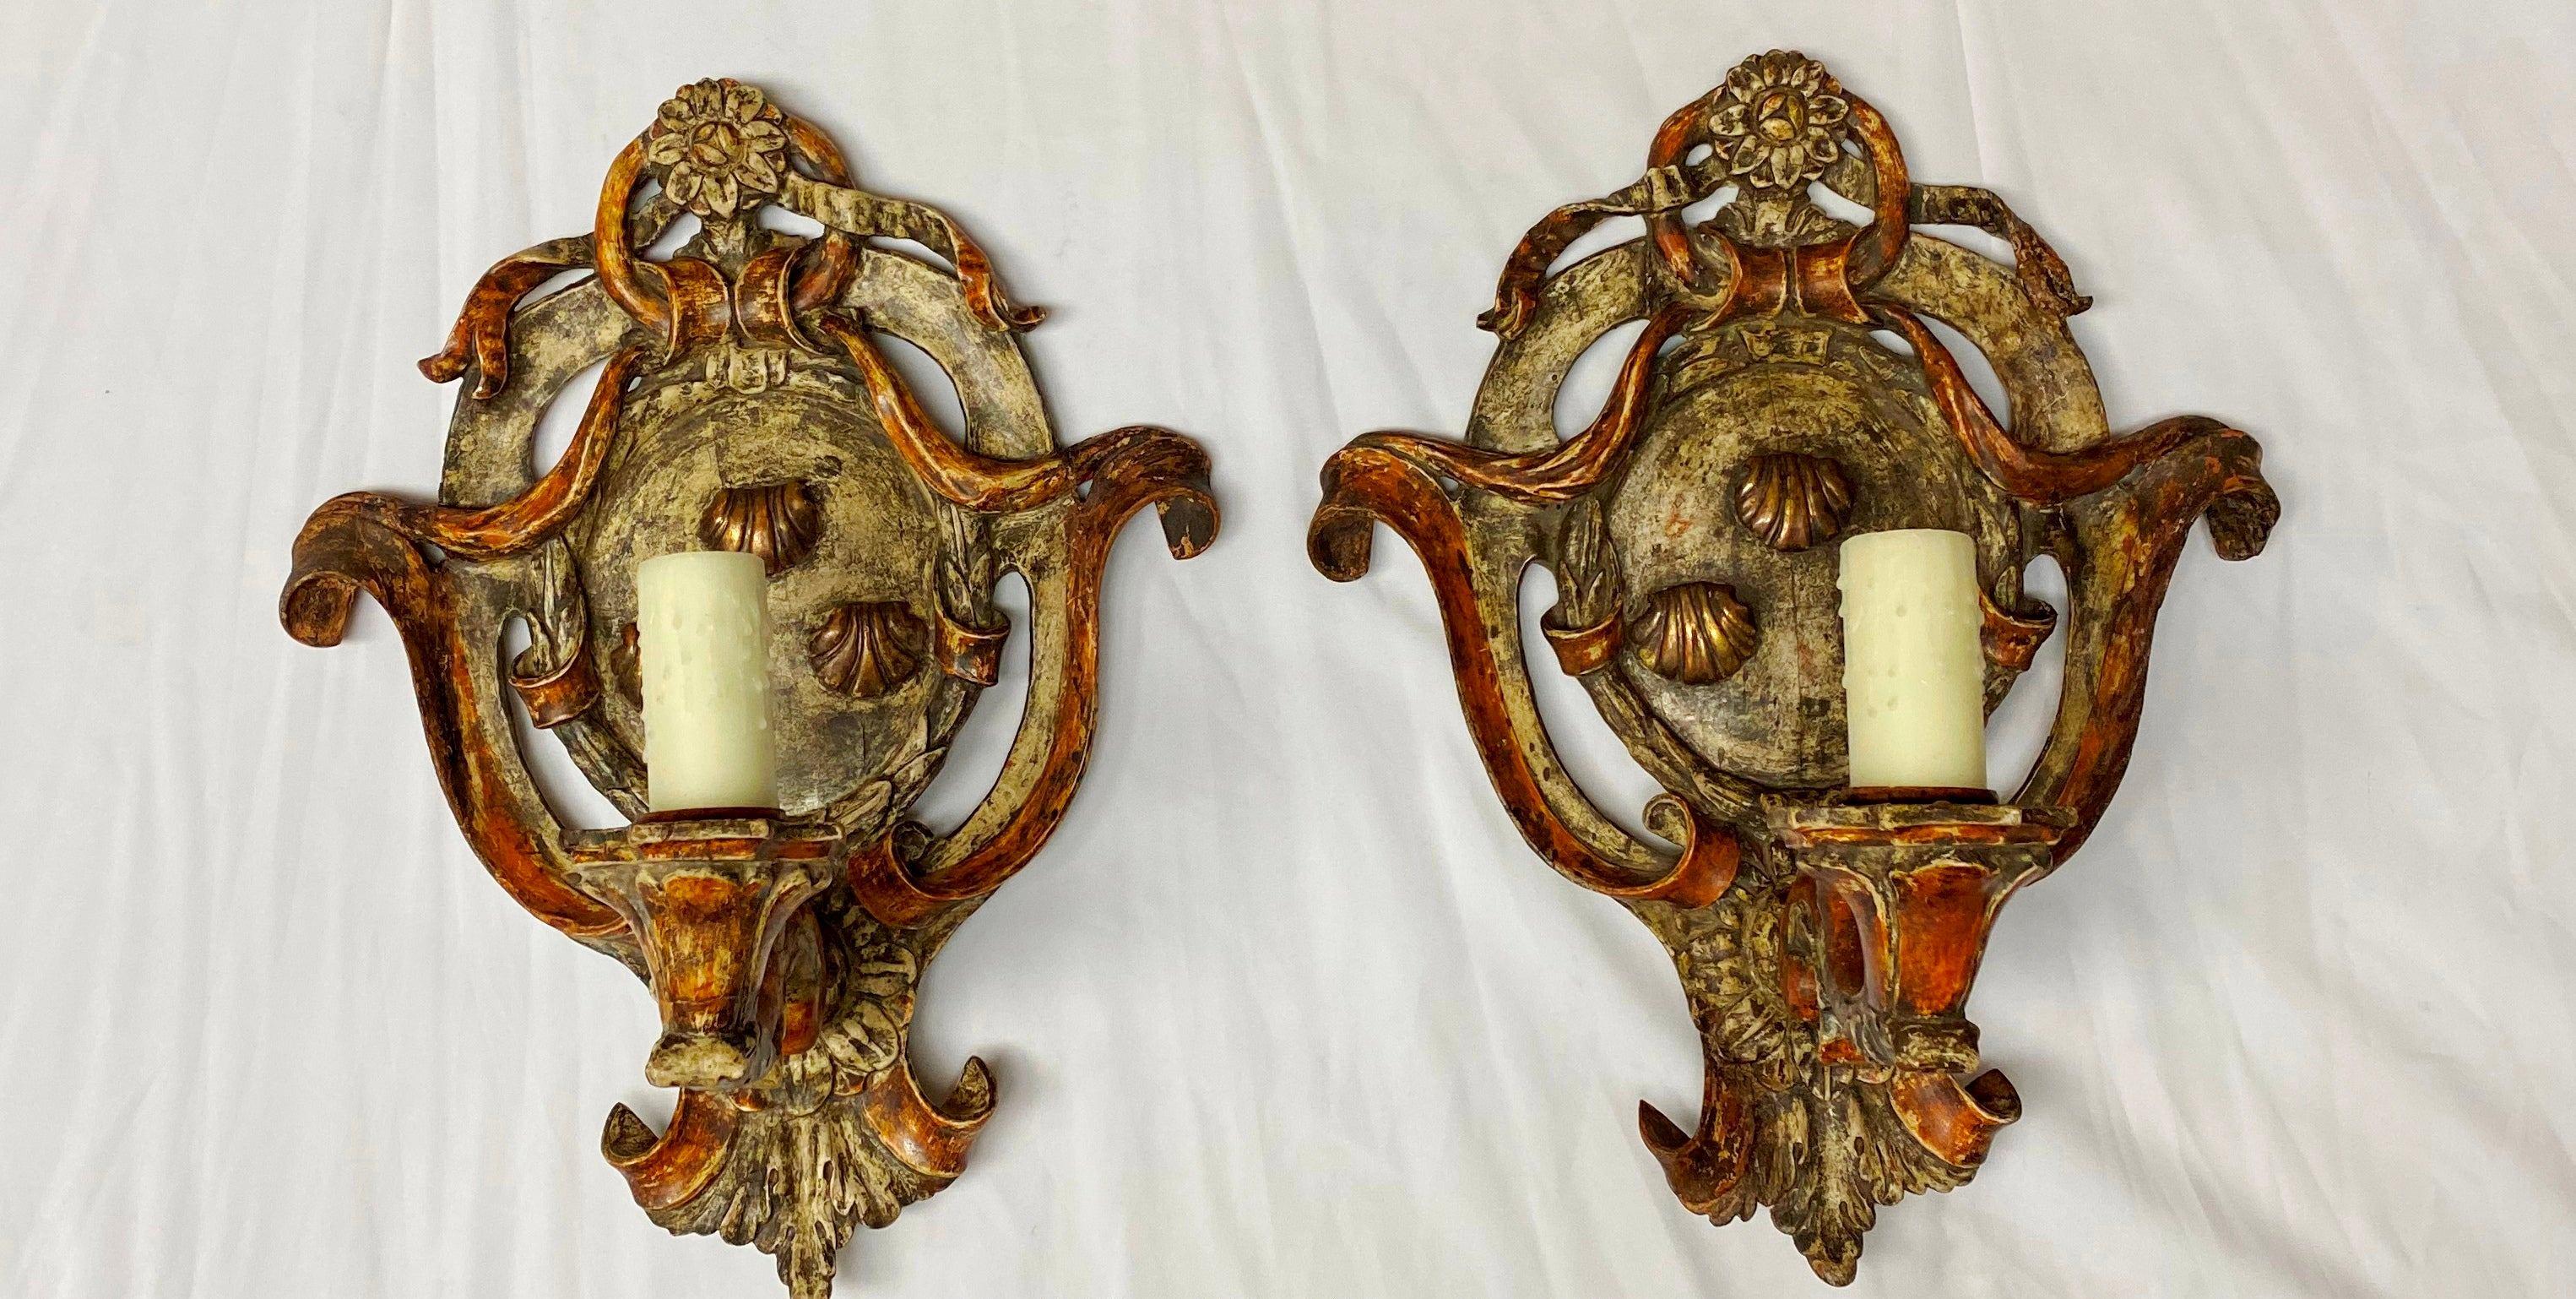 Pair of Italian Baroque style painted carved wood sconces, 19th century. 
Each surmounted with a rosette above a ribboned hand painted and parcel gilt cartouche, issuing a single hand carved foliate inspired candle arm terminating in a bees wax